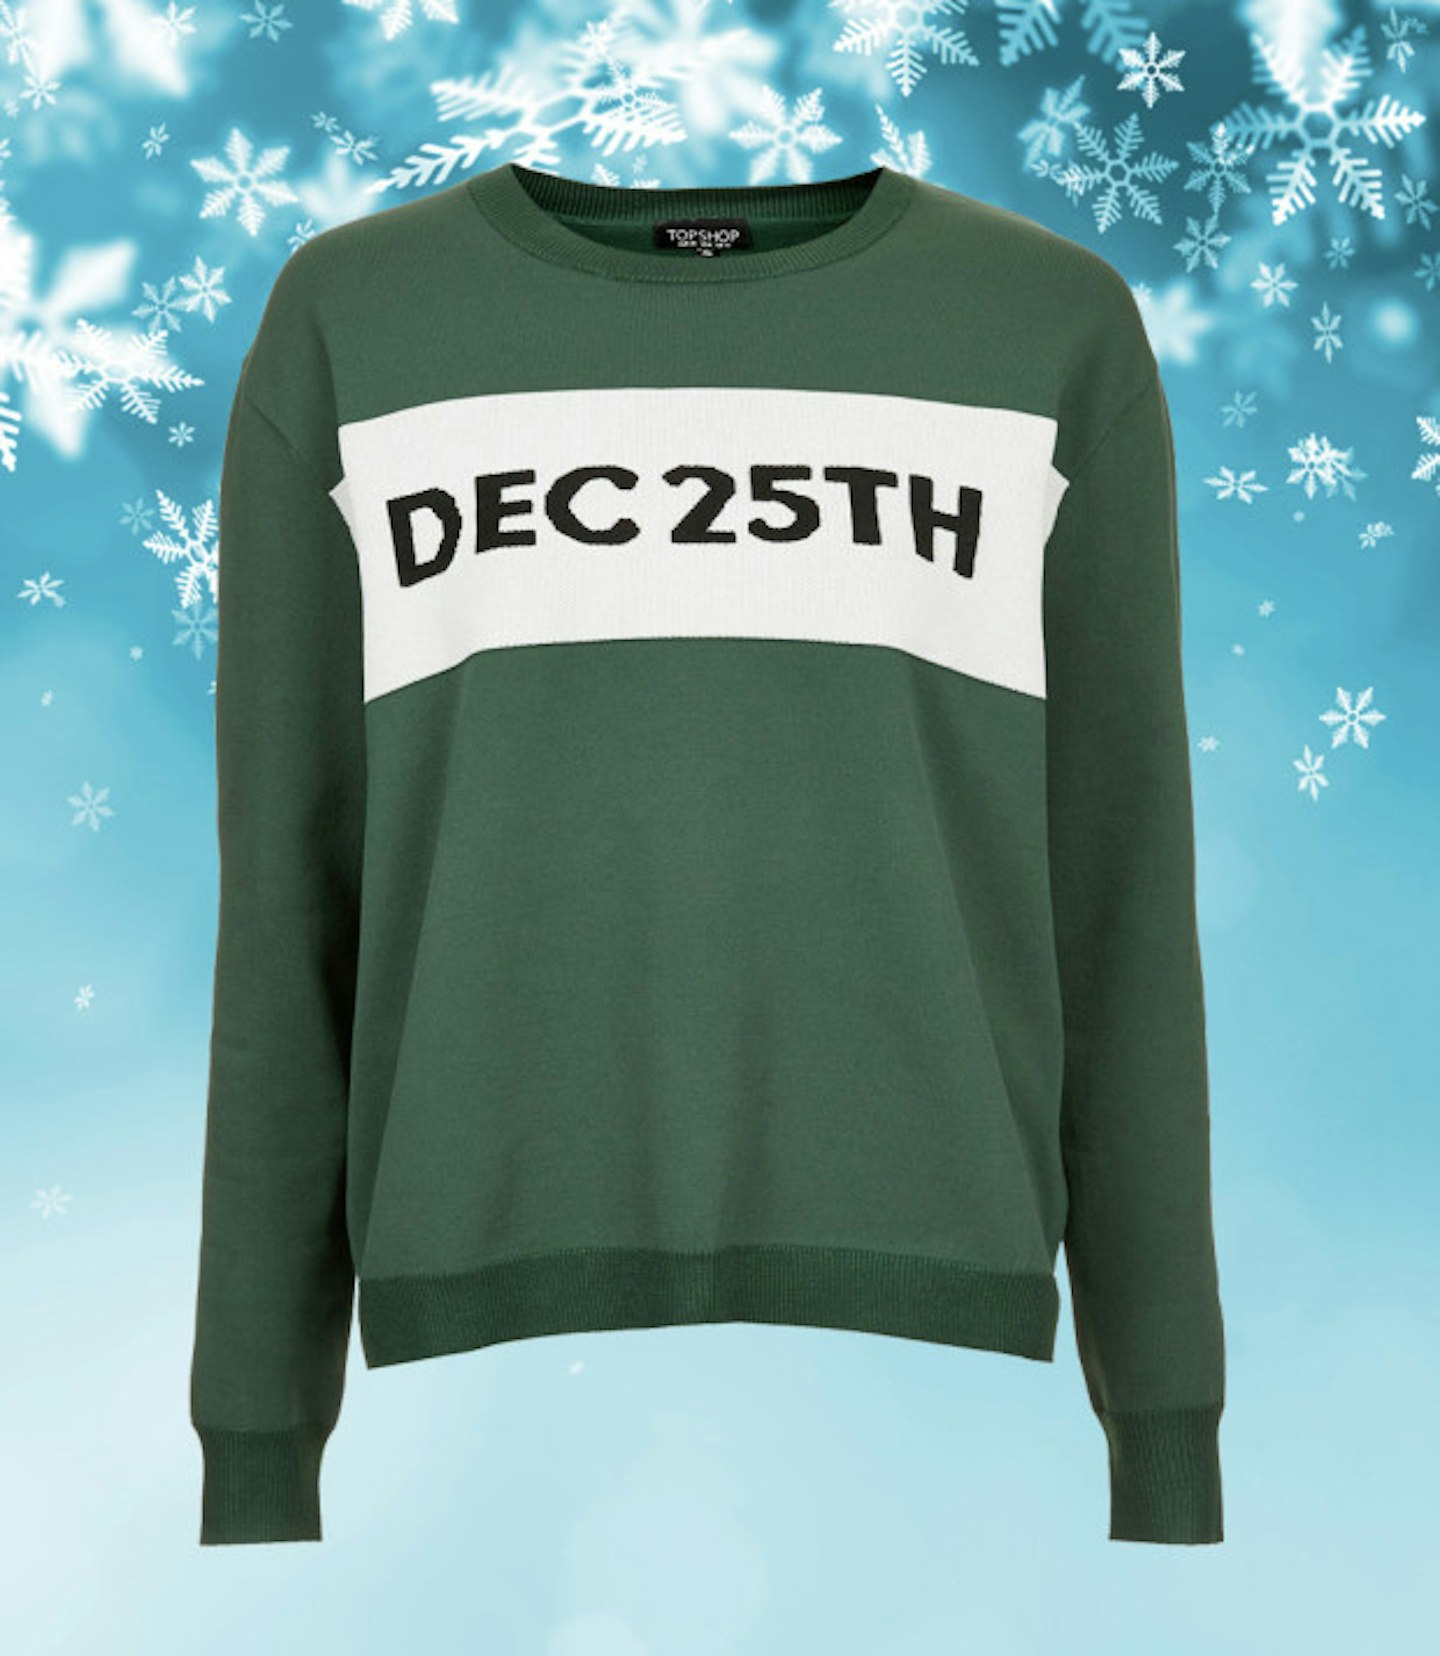 christmas-jumpers-topshop-dark-green-white-dec-25th